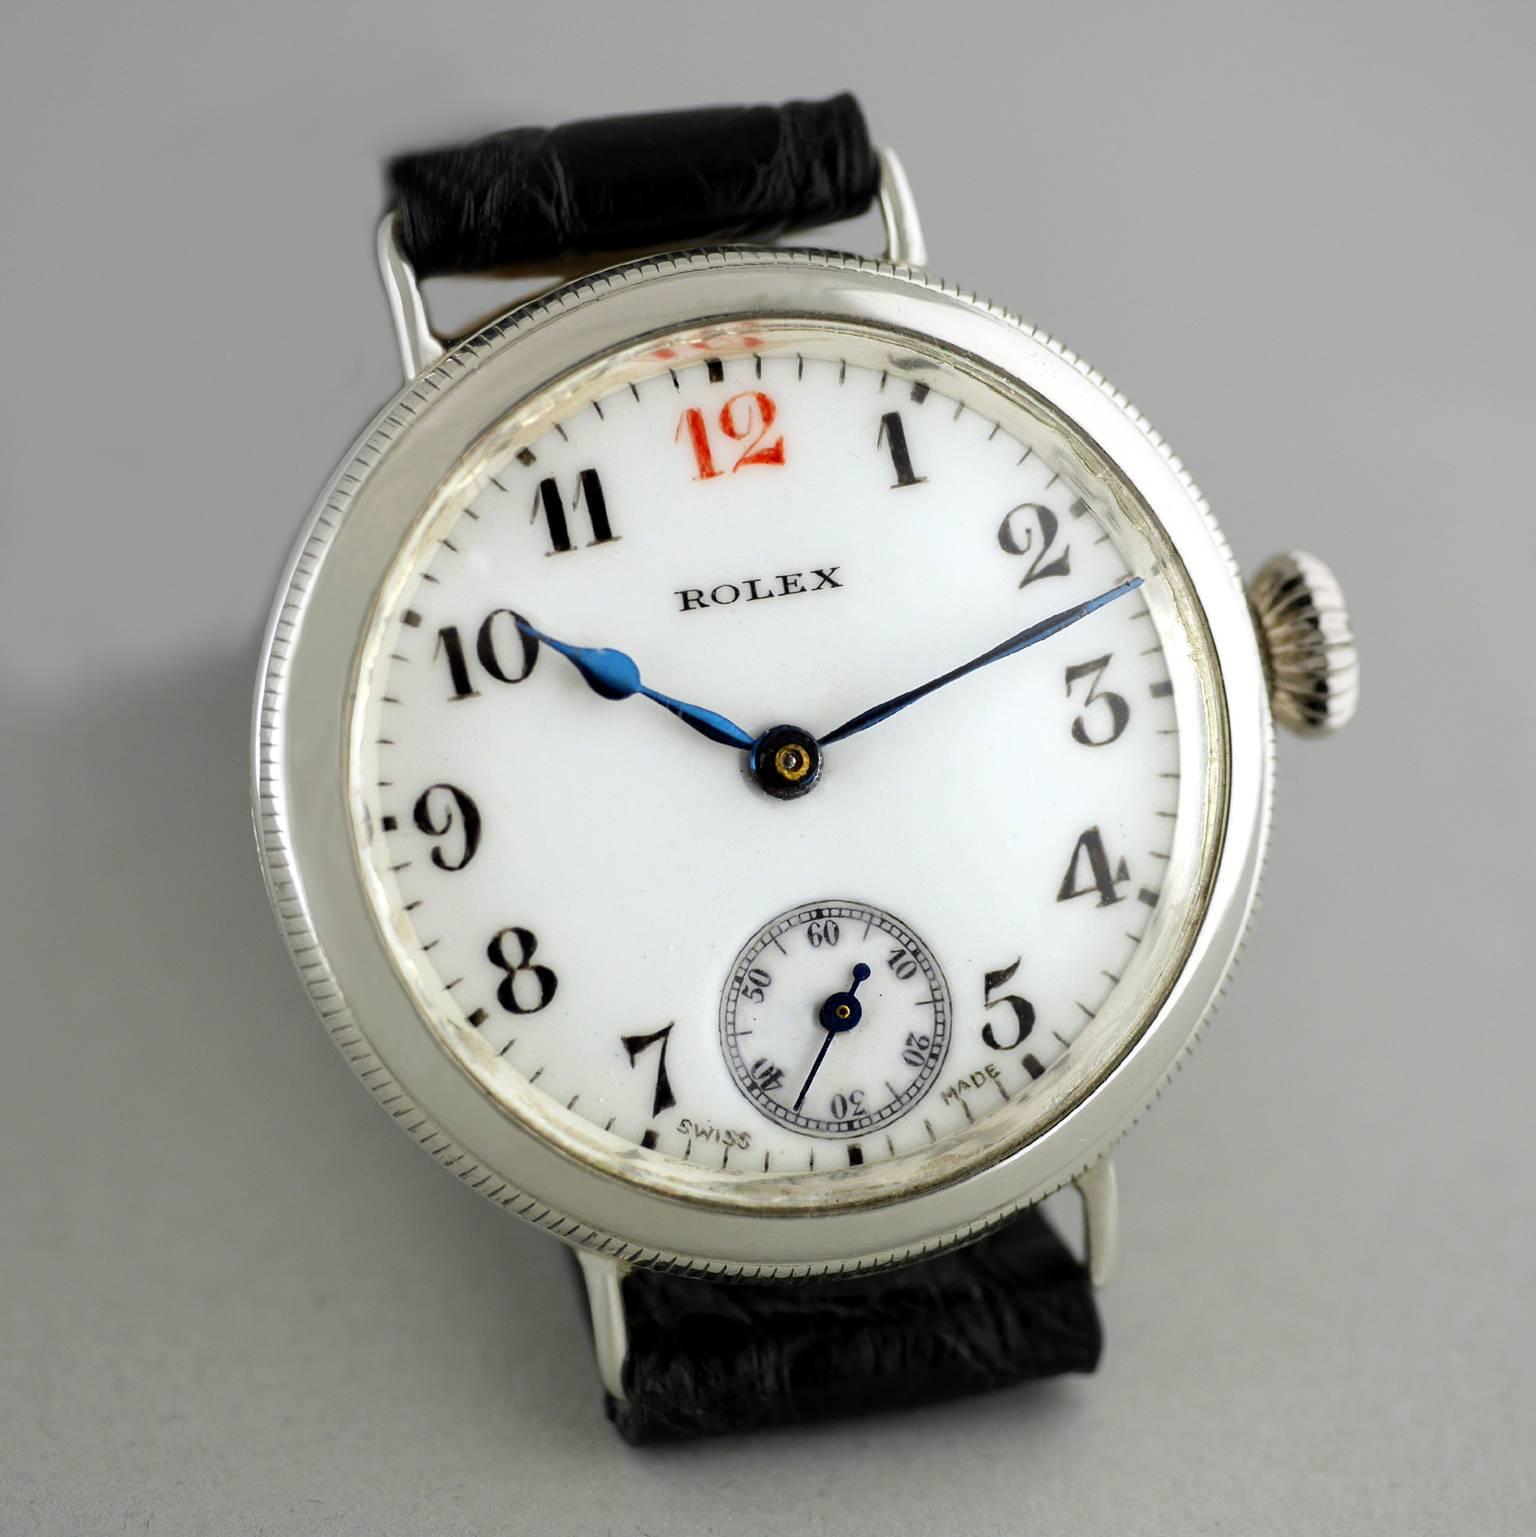 A rare vintage Officers wristwatch by Rolex made in 1917.

Sterling Silver round case with screw down bezel and back, hallmarked for London Import into the United Kingdom in 1917.

15-Jewel Rolex movement .

White enamel dial with black period